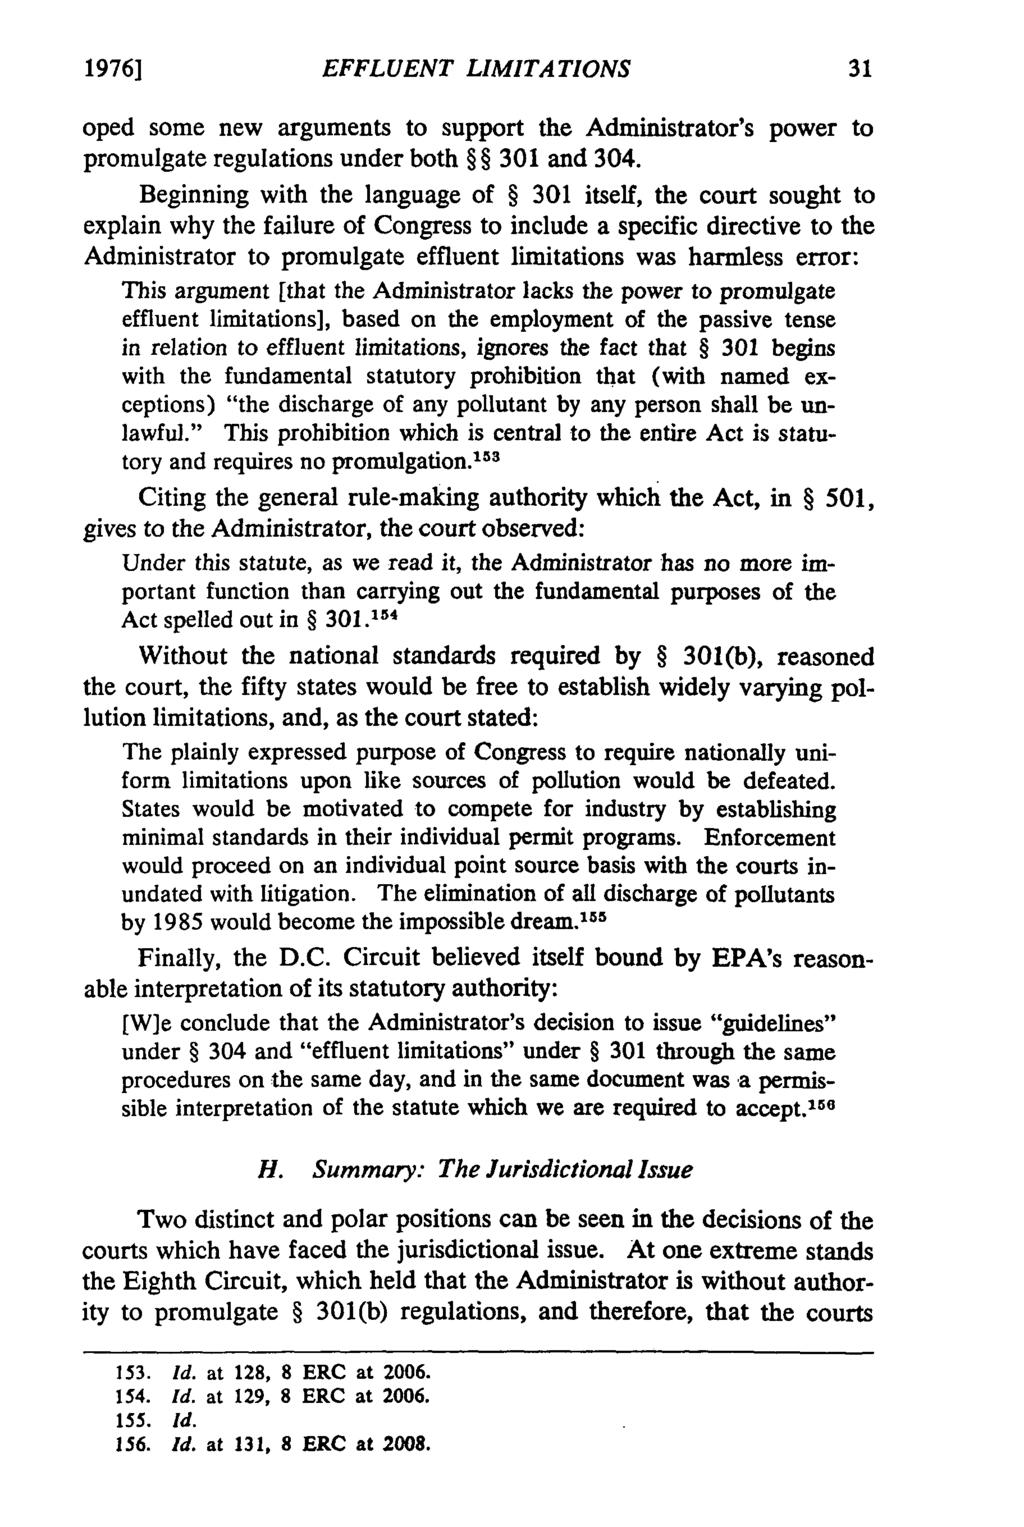 1976] EFFLUENT LIMITATIONS oped some new arguments to support the Administrator's power to promulgate regulations under both 301 and 304.